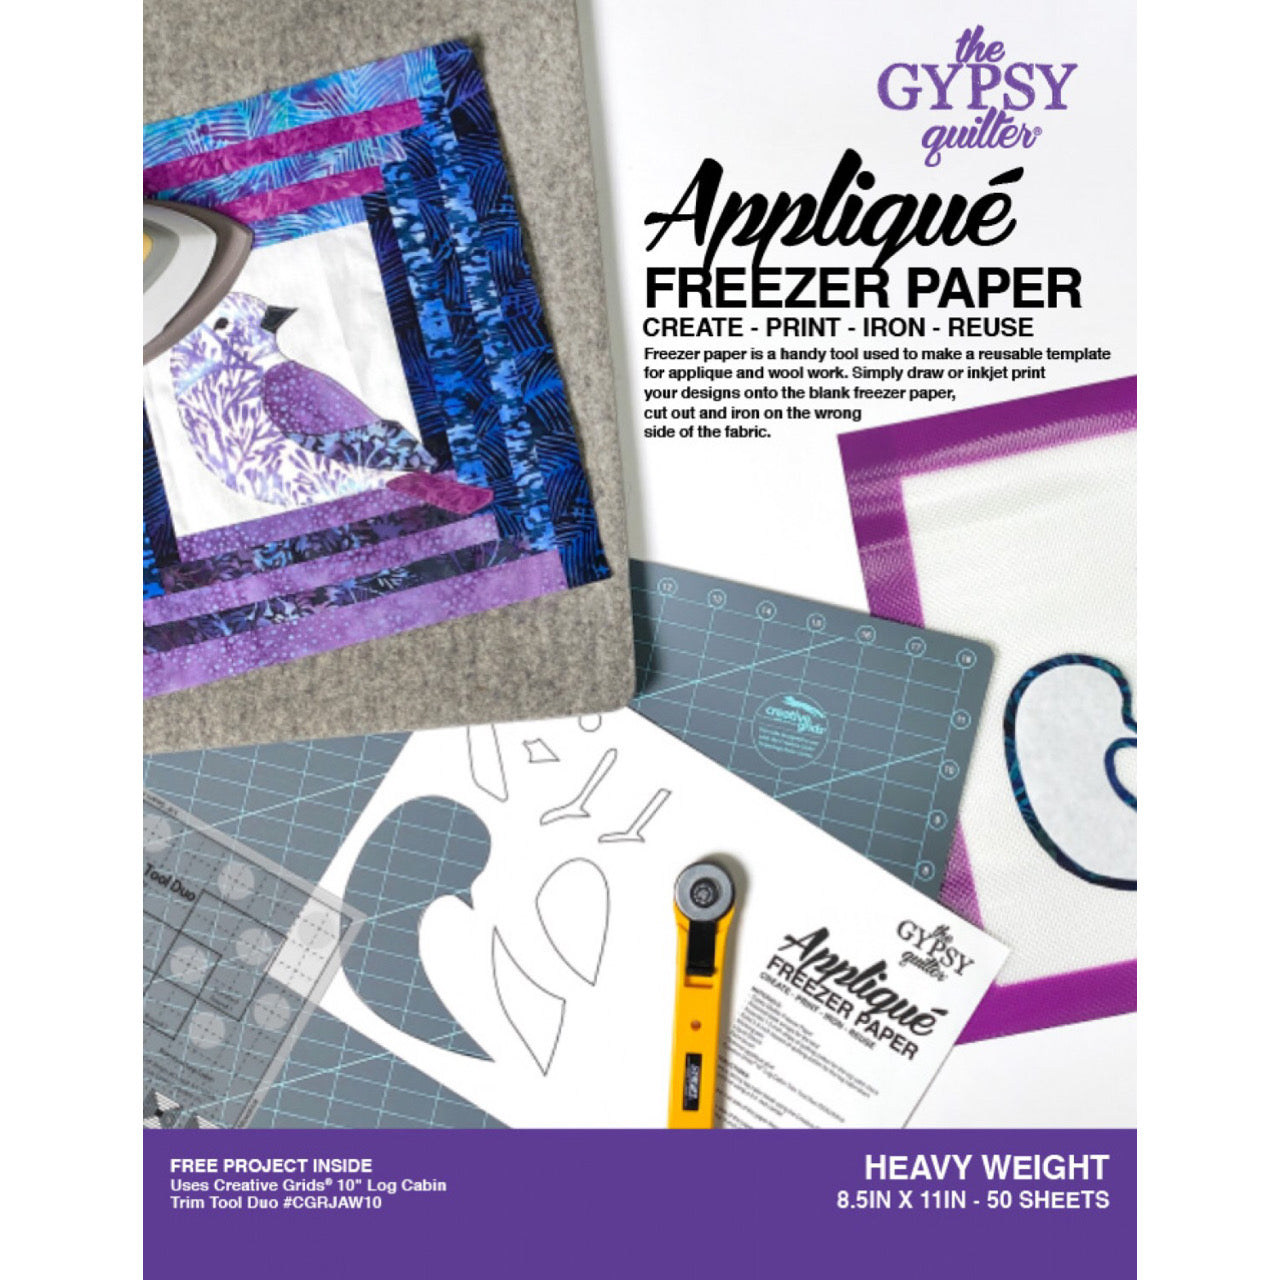 Applique Freezer Paper by Gypsy Quilter